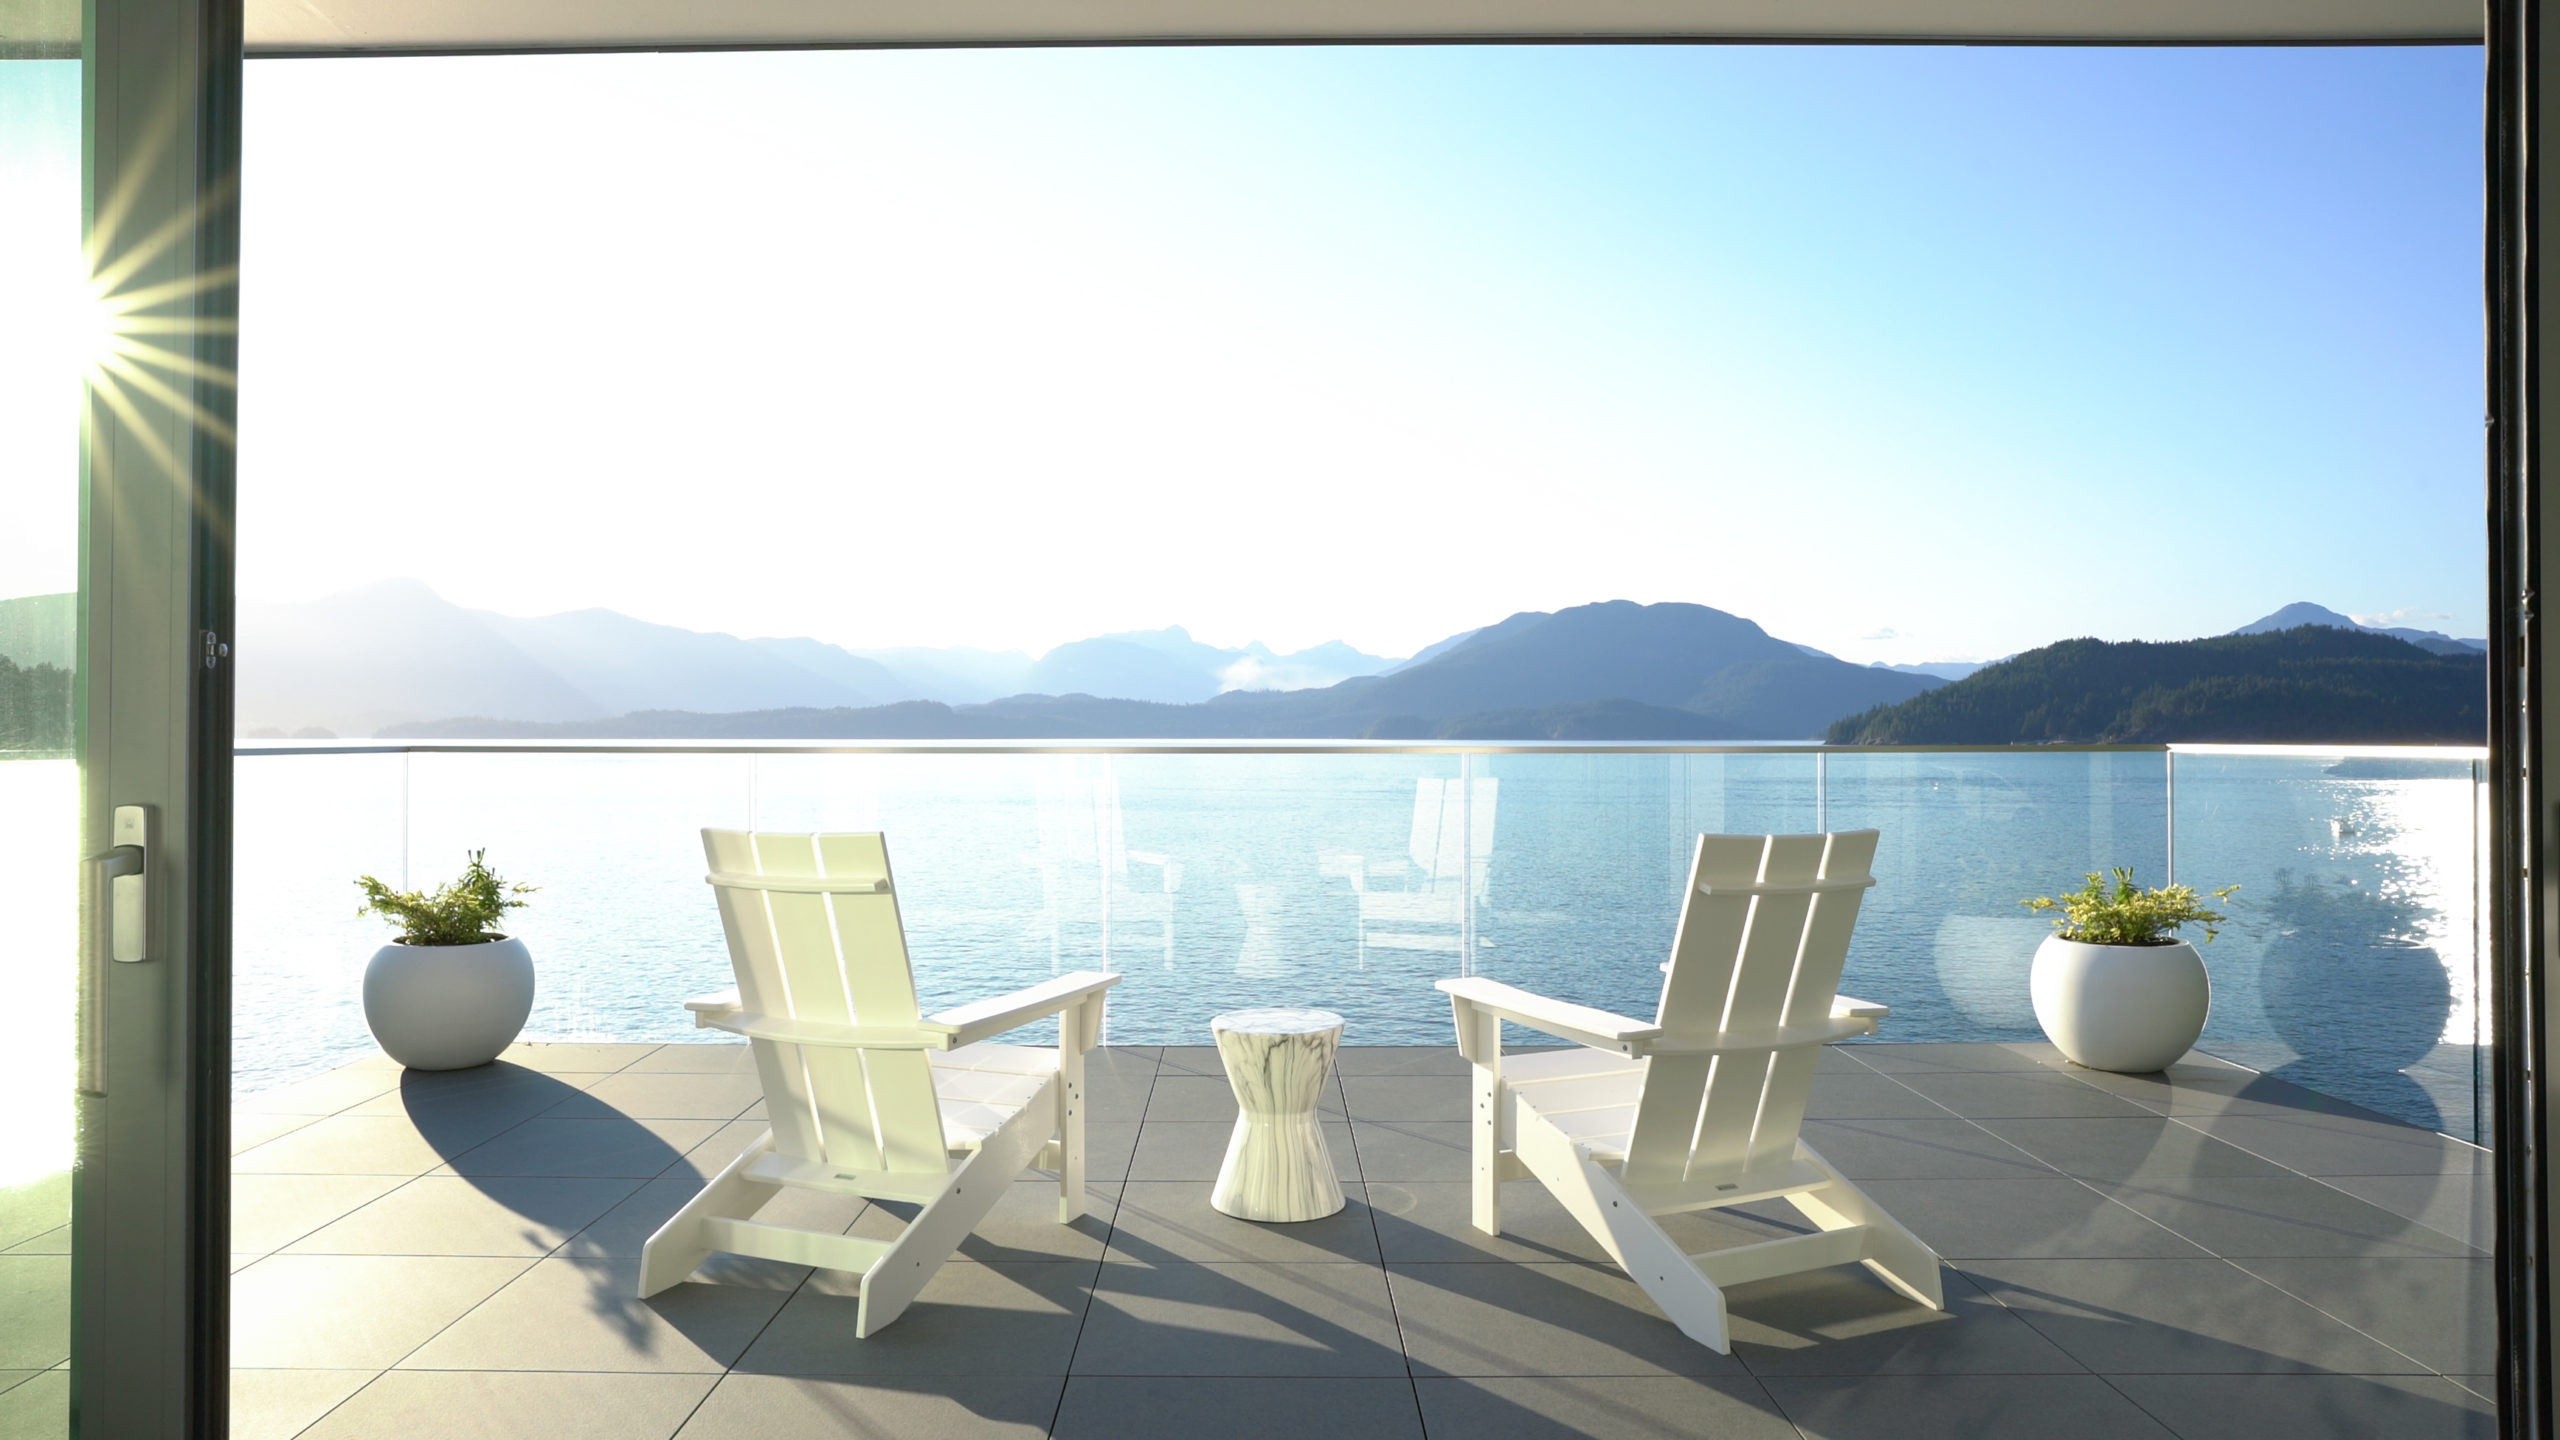 Balcony with minimalist design and ocean view in a custom residence on Bowen Island.